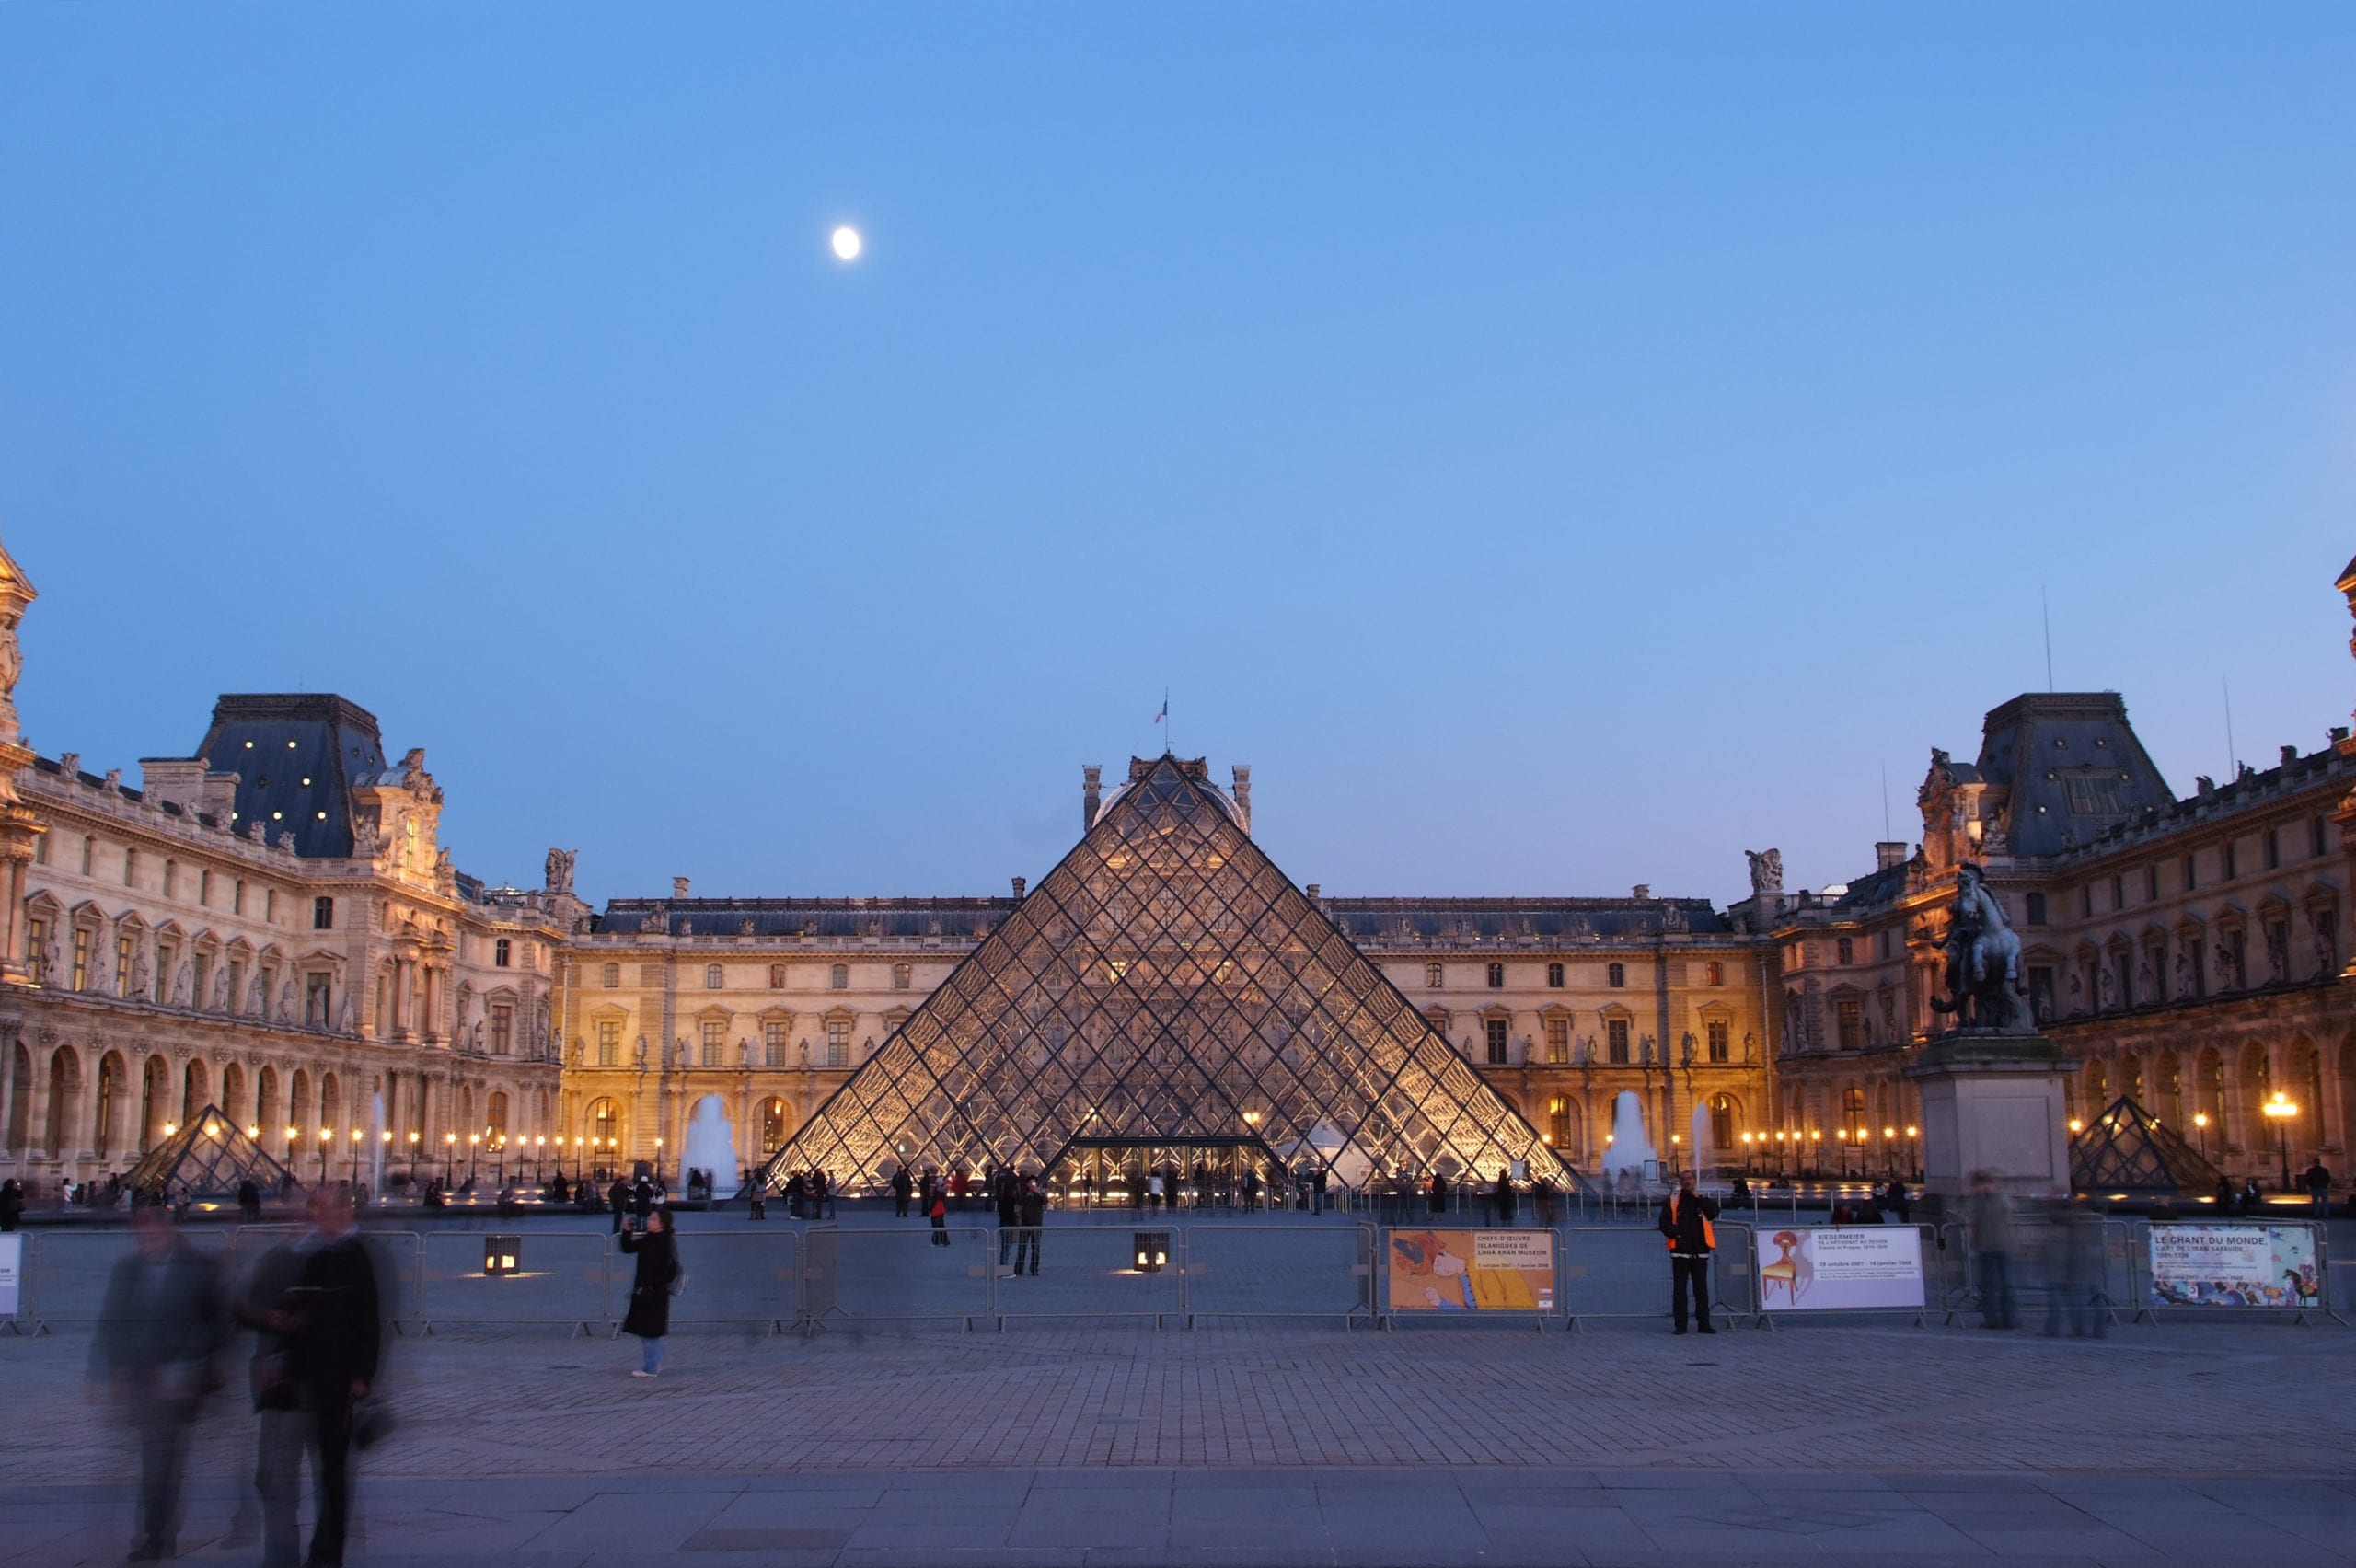 ‘A Night at the Louvre’: Documentary gives rare look into the world’s most revered museum